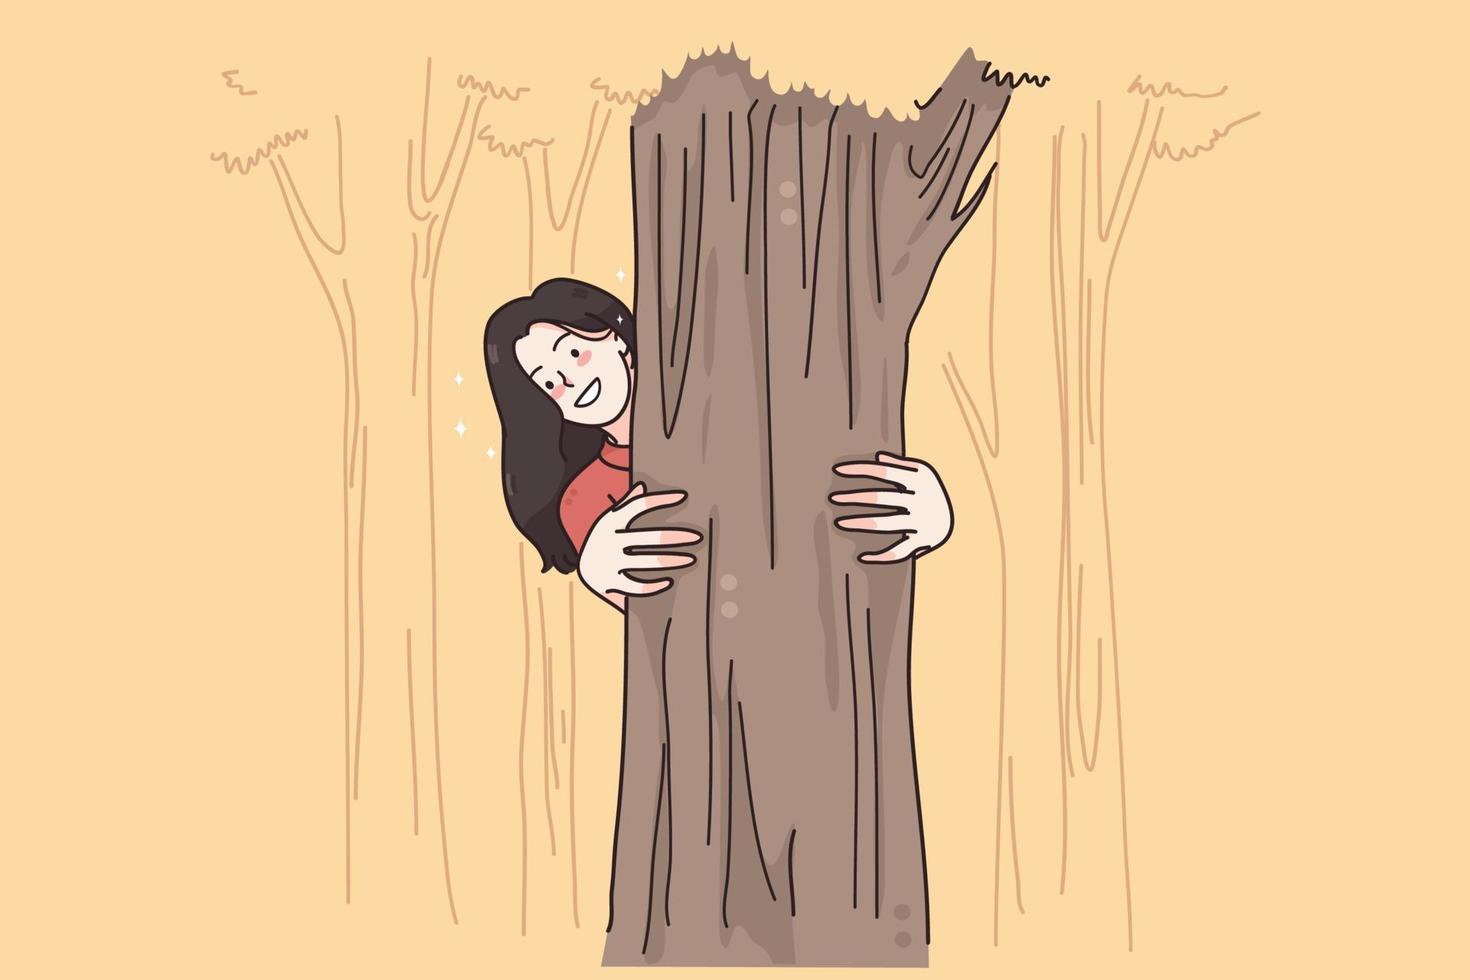 Summer activities and leisure concept. Young smiling female cartoon character hugging and looking from tree in park or forest feeling active and playful vector illustration